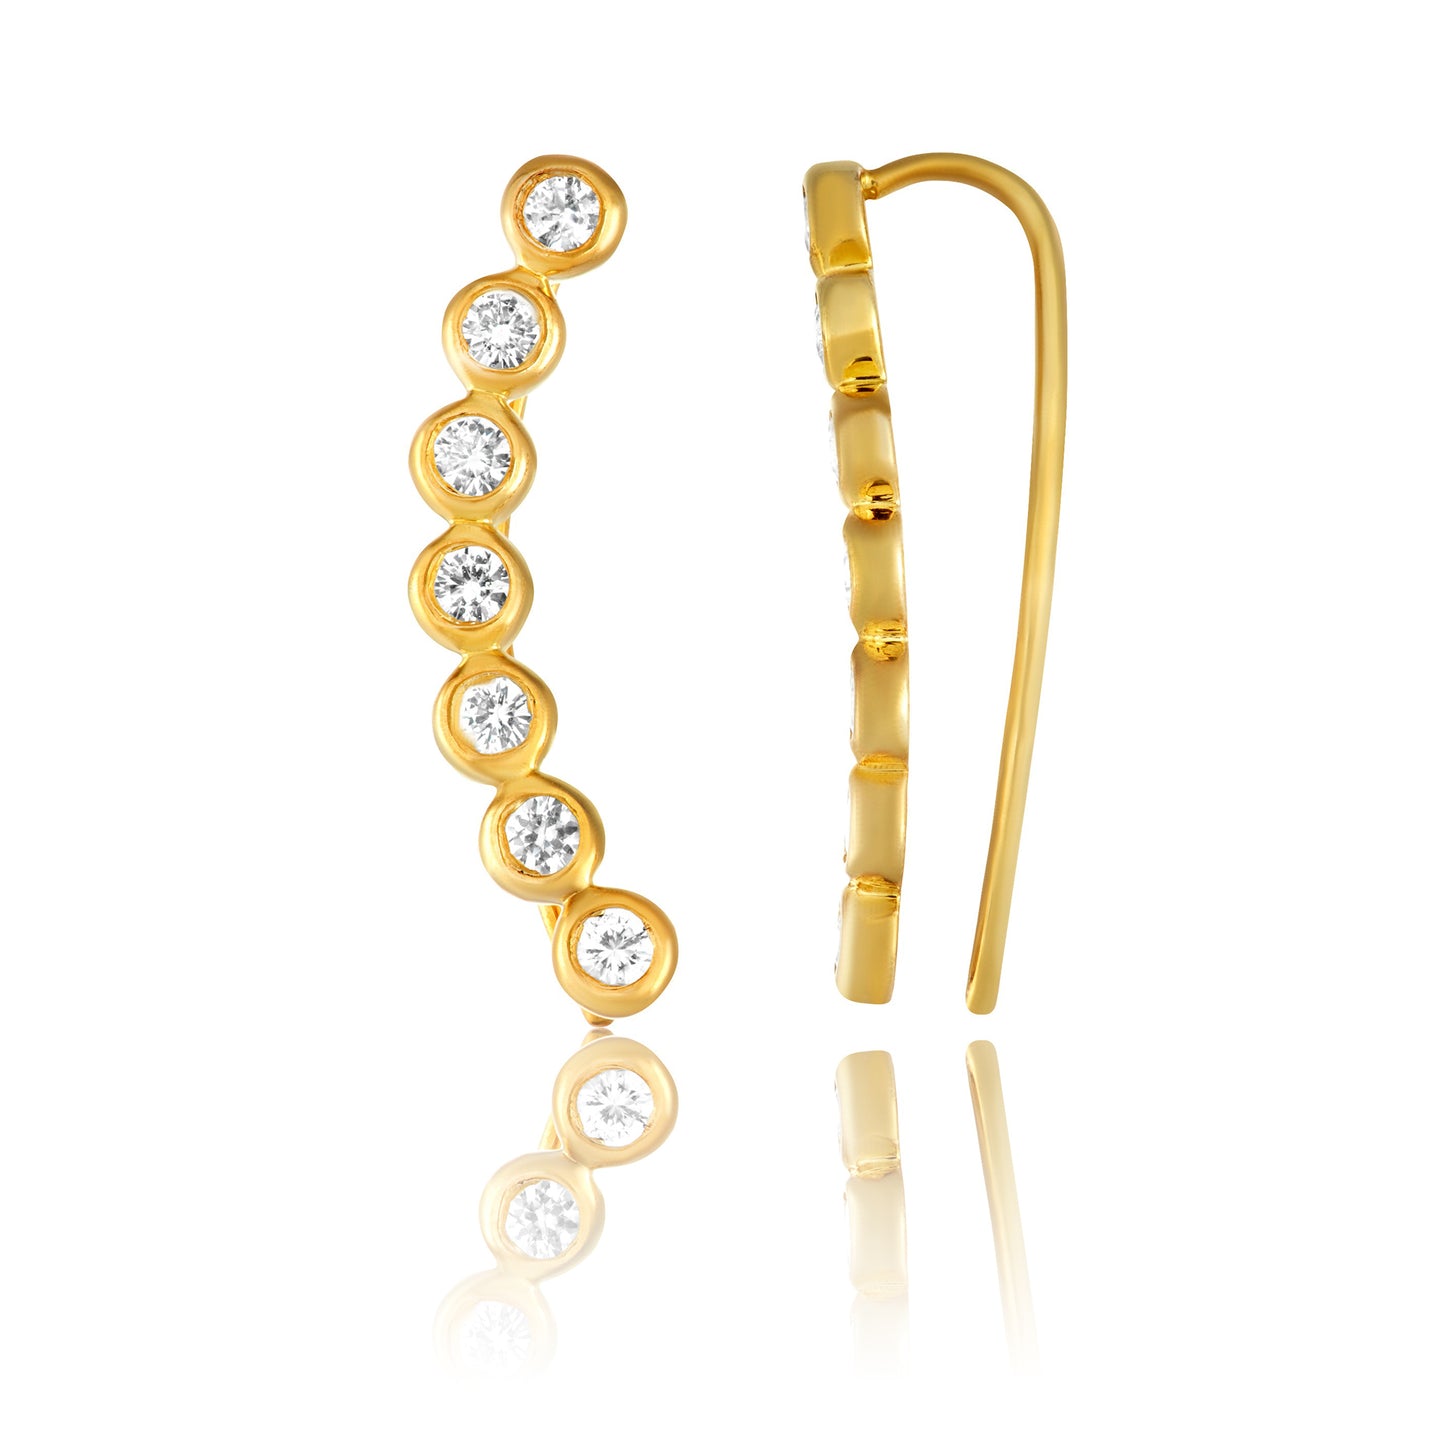 Yellow Goldplated Silver 0.75ct TDW White Diamond Climber Earrings